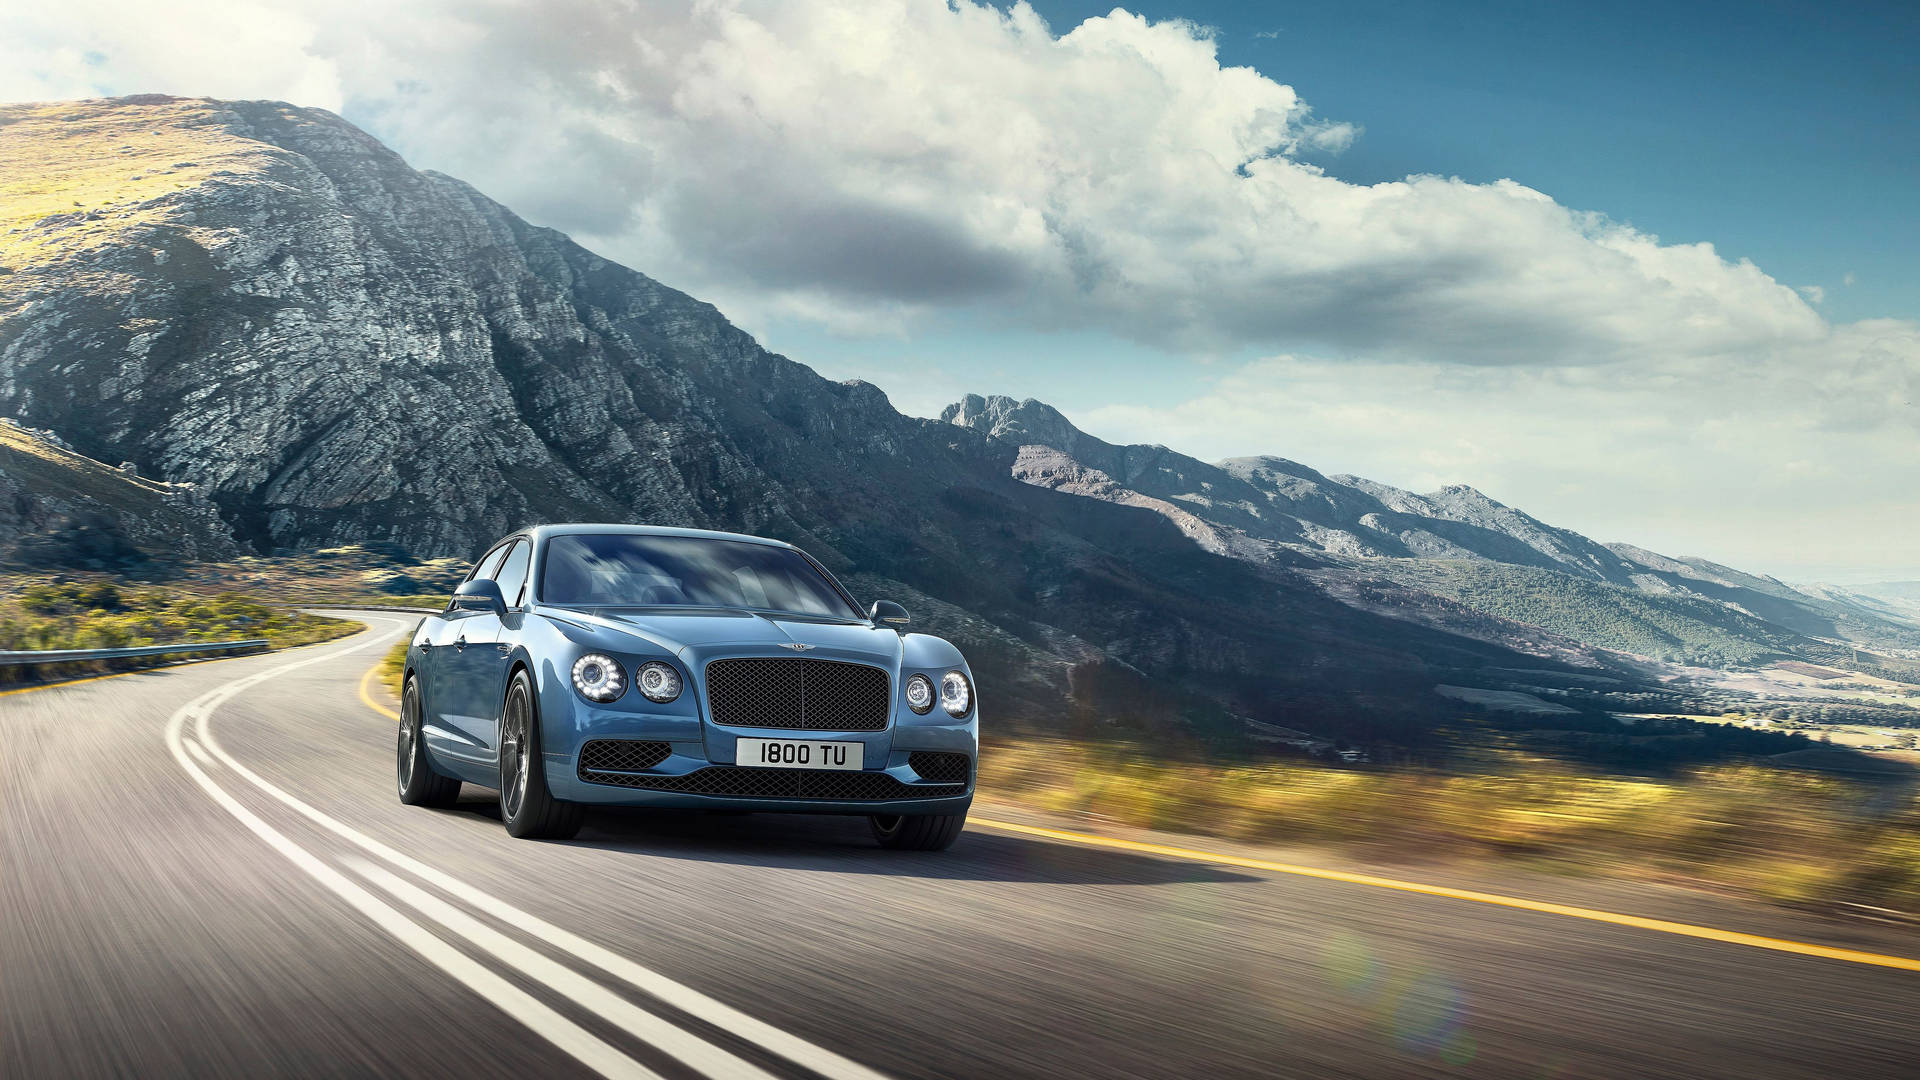 Experience Luxury And Performance With The Bentley Flying Spur Background